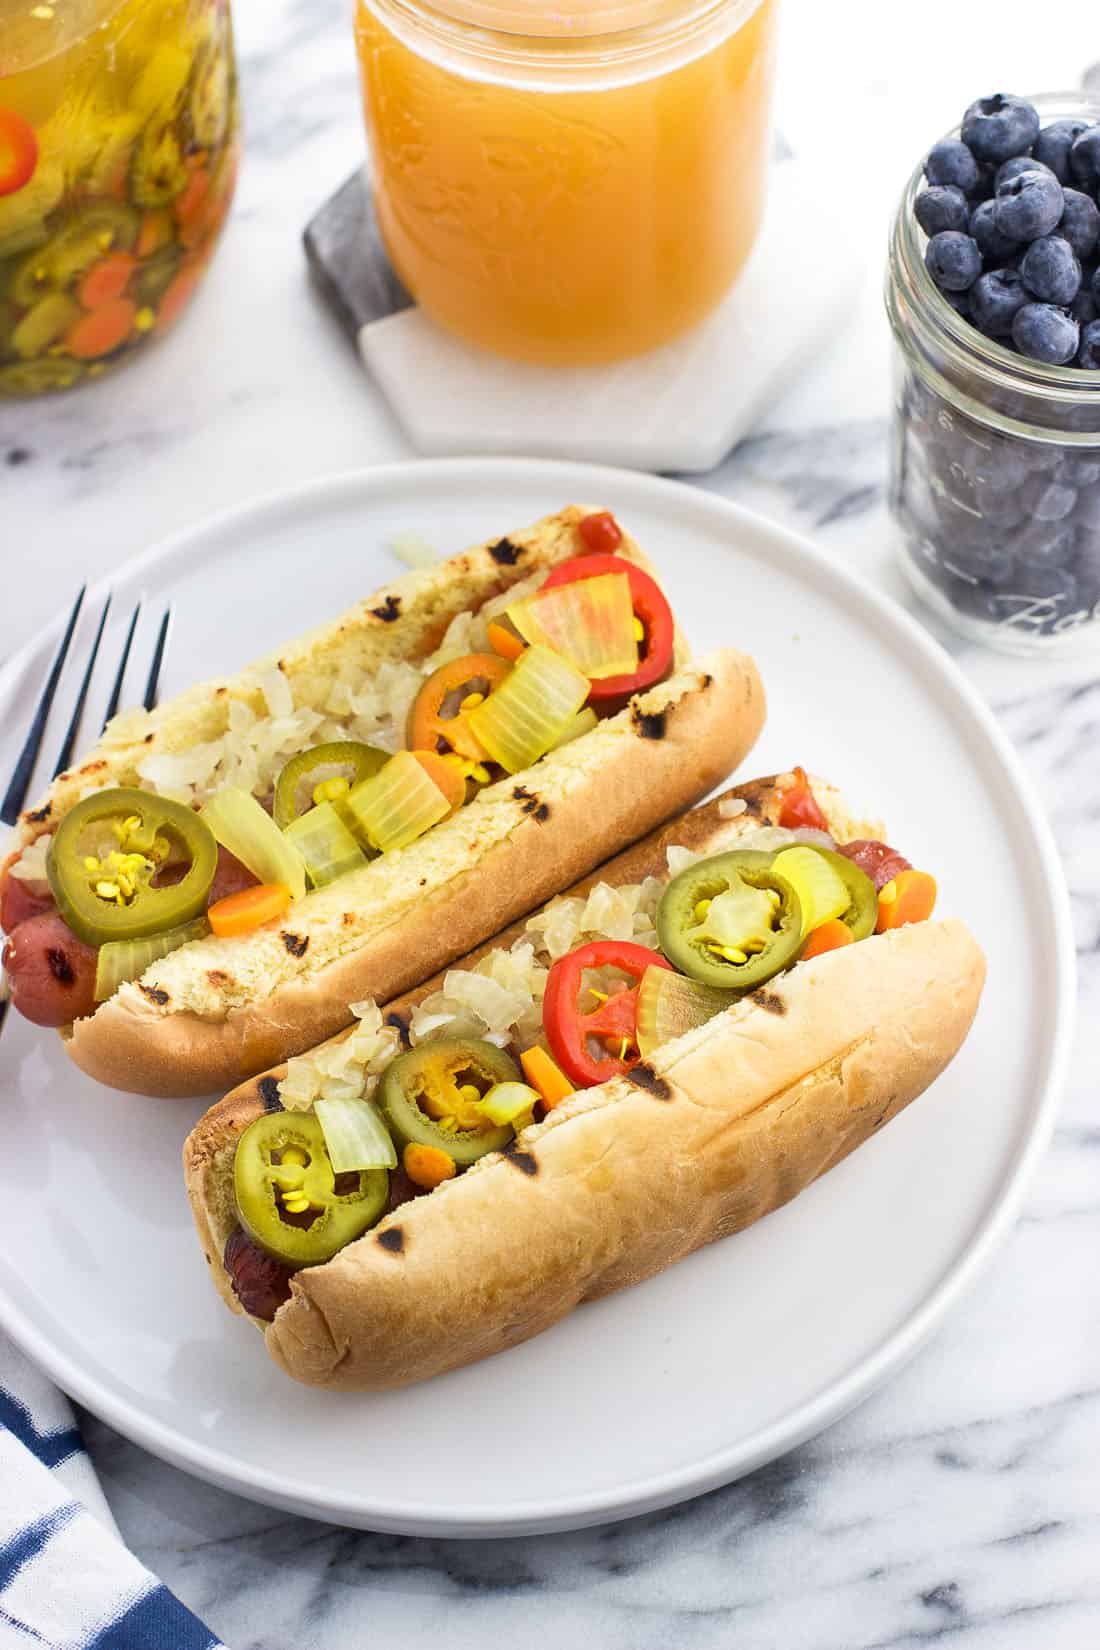 Two dressed hot dogs on a plate.